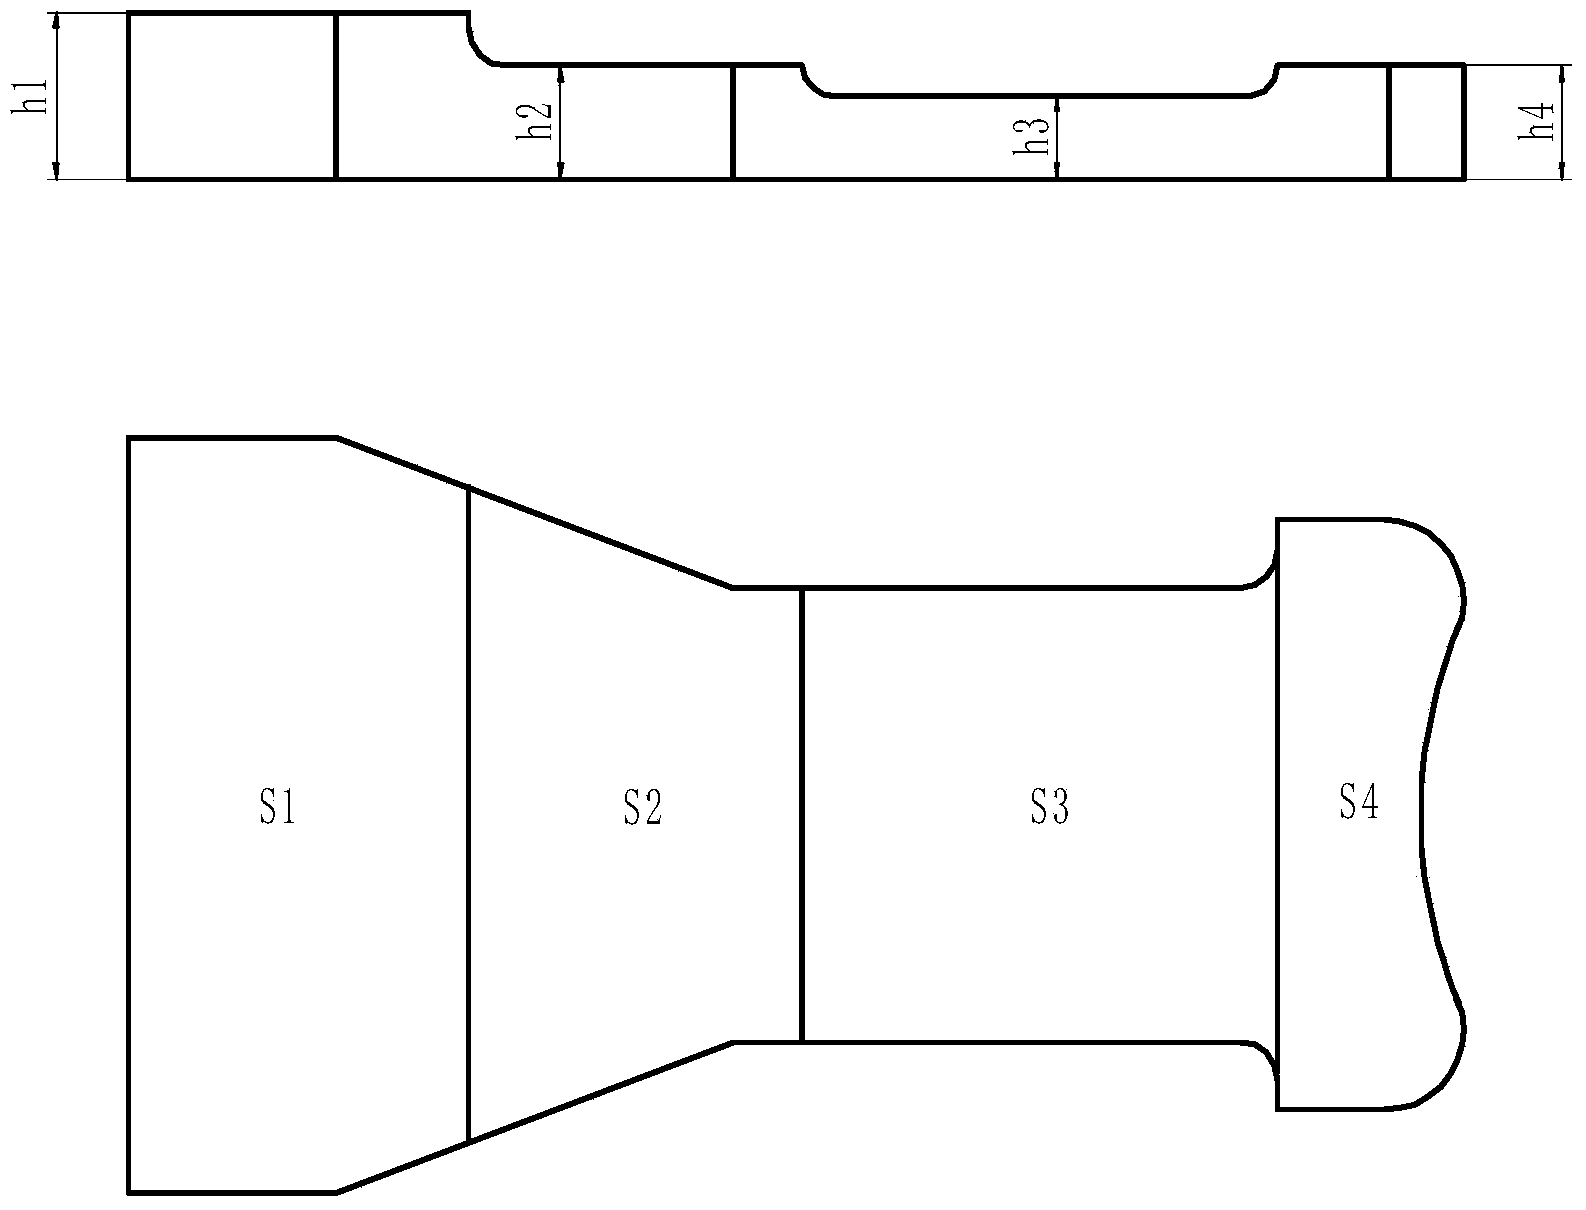 Loose tooling forging blank forming method of long-sheet complicated die forge piece